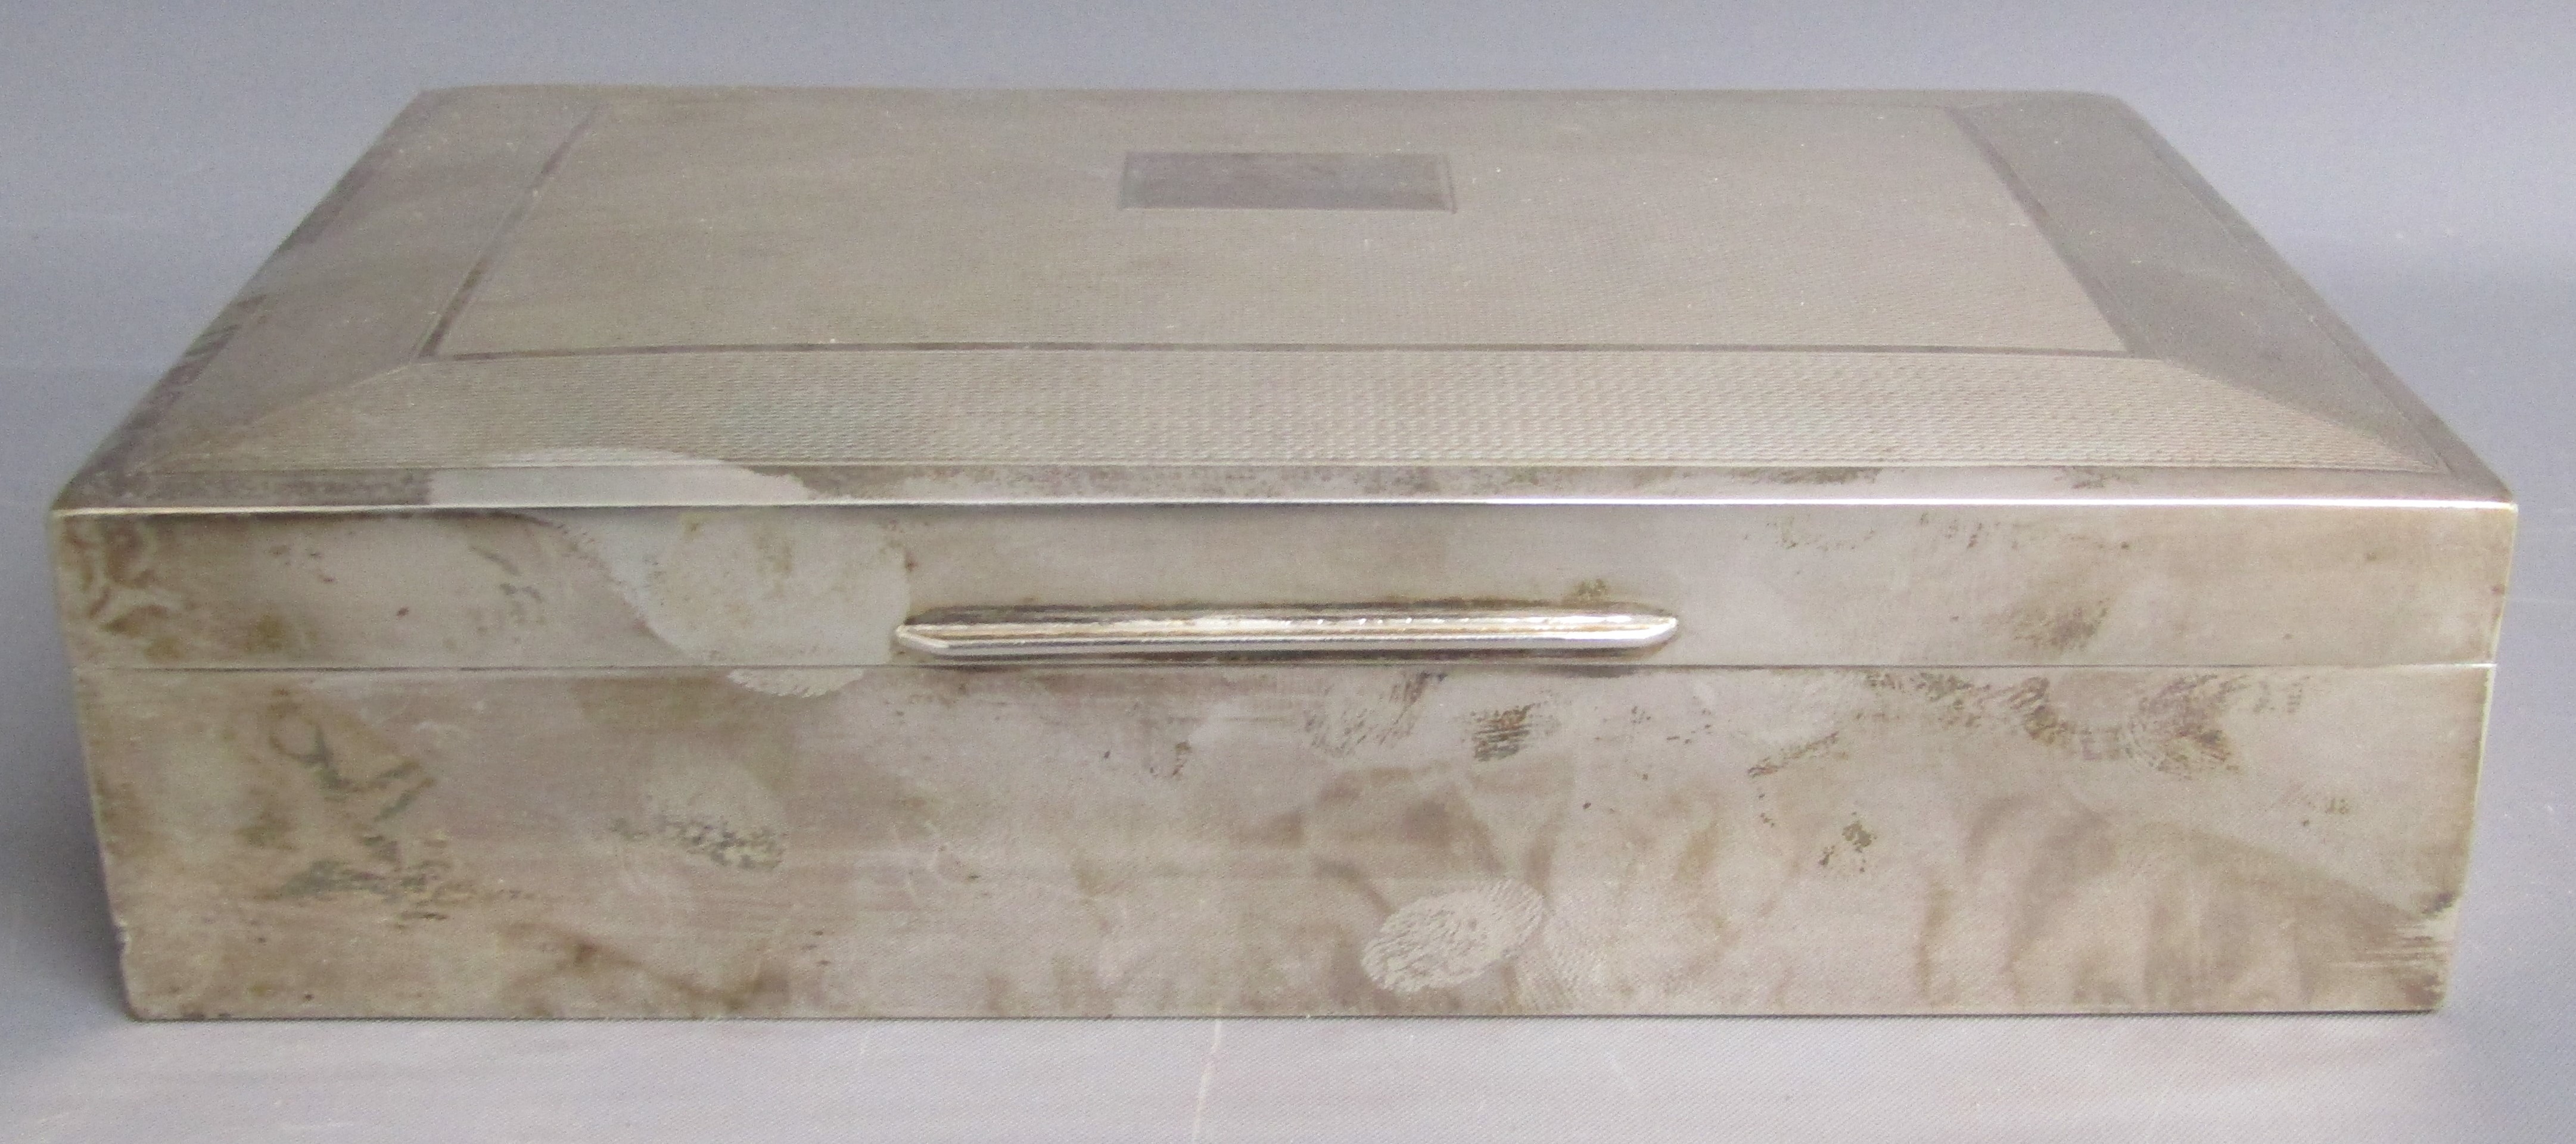 Viner's wood lined silver cigarette box with 2 boxes of matches, Sheffield 1962  - approx. 16.5cm - Bild 8 aus 16